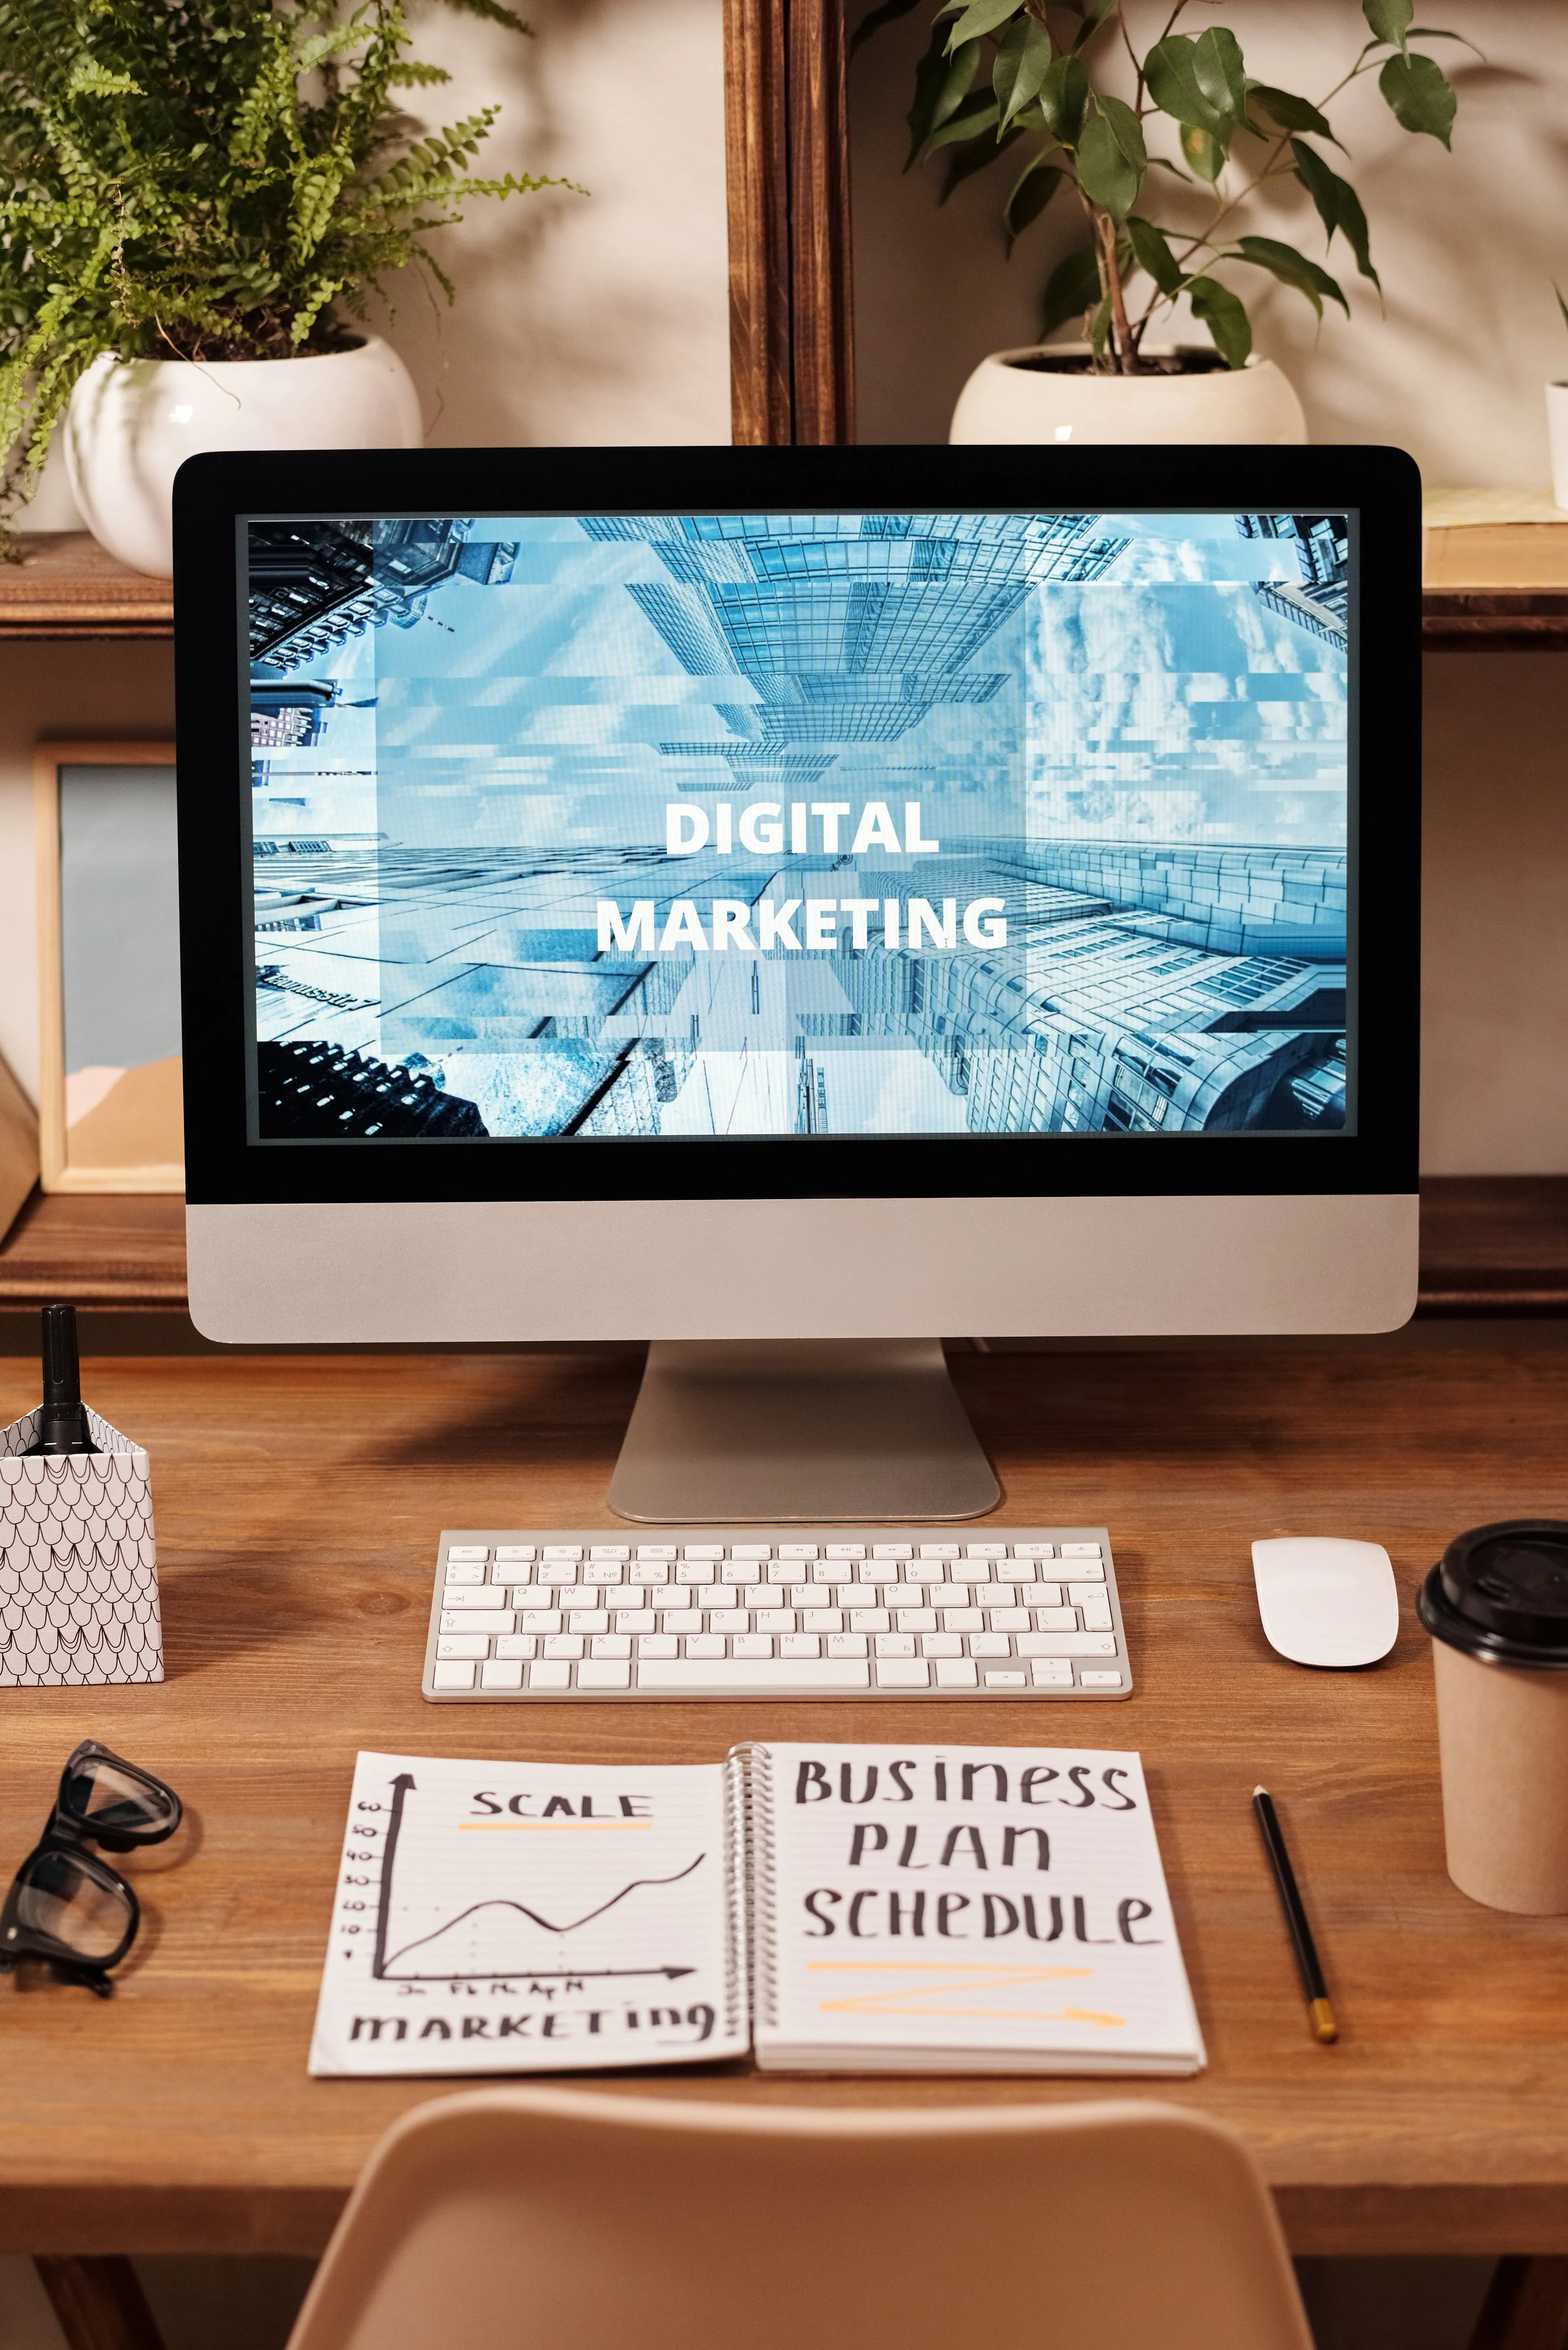 Digital Marketing Trends: What's Next for Businesses